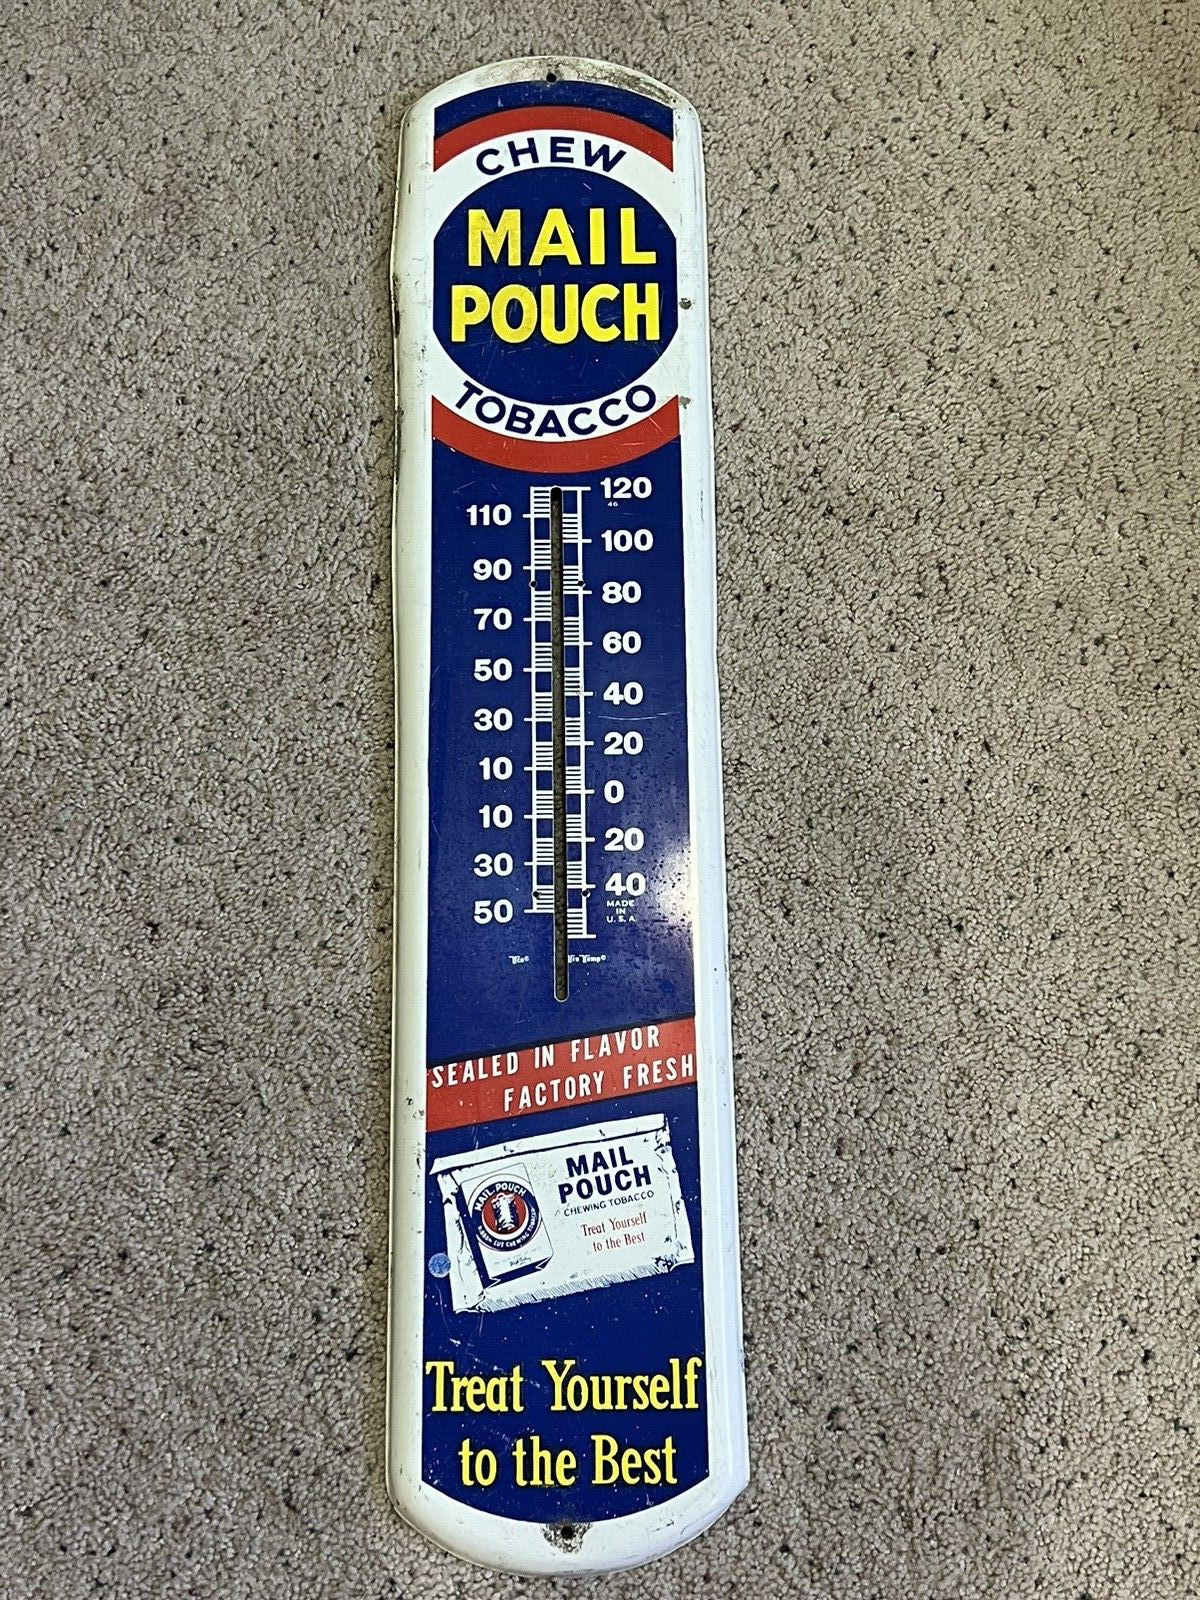 Vintage Mail Pouch Tobacco Metal Hanging Wall Thermometer / Sign 38